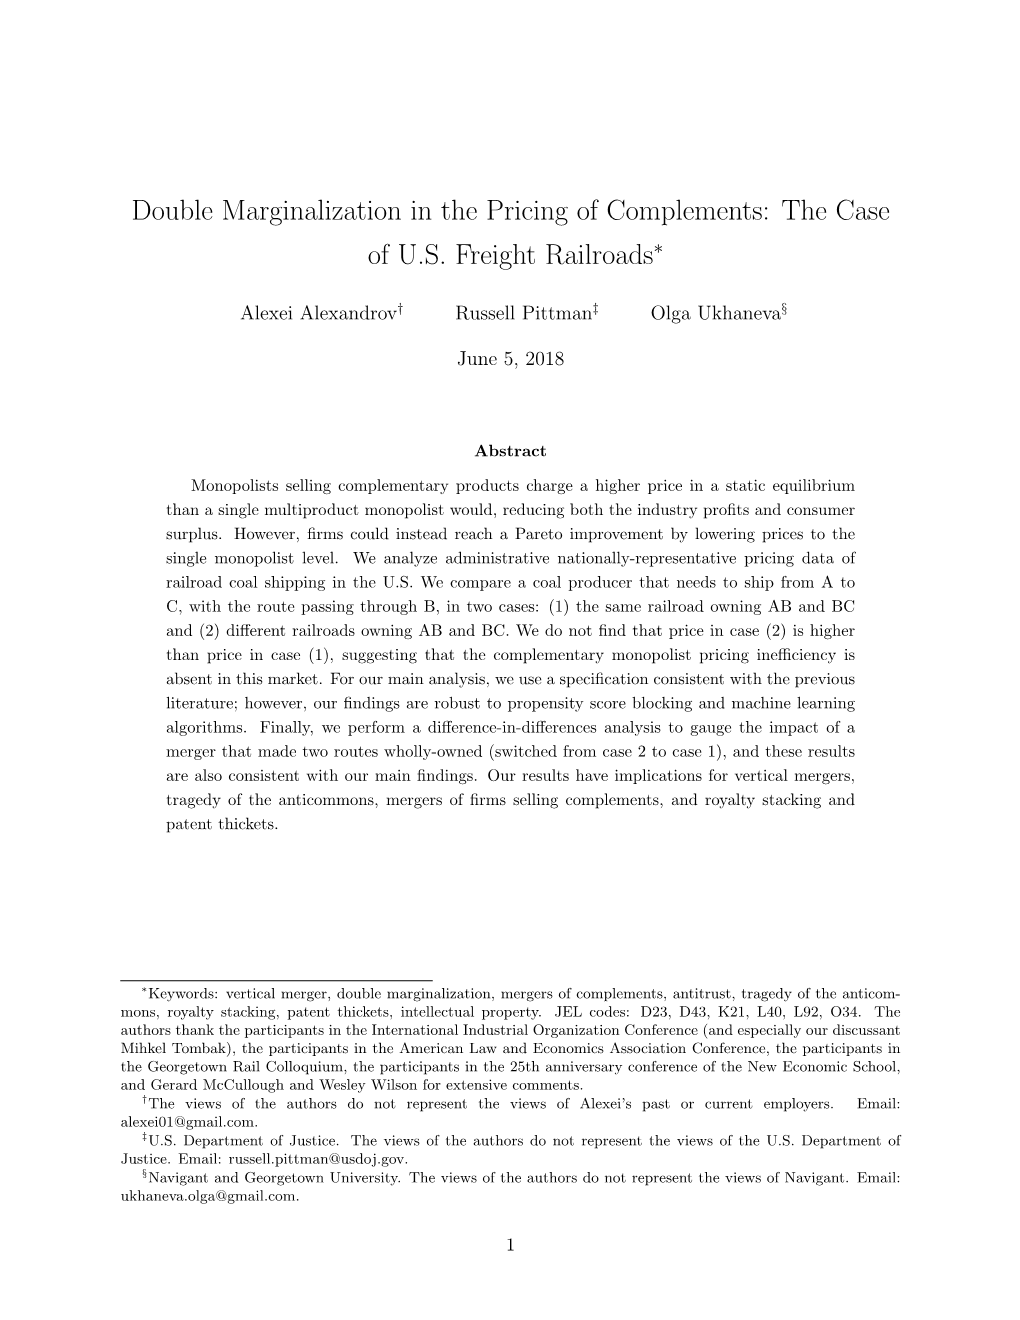 Double Marginalization in the Pricing of Complements: the Case of U.S